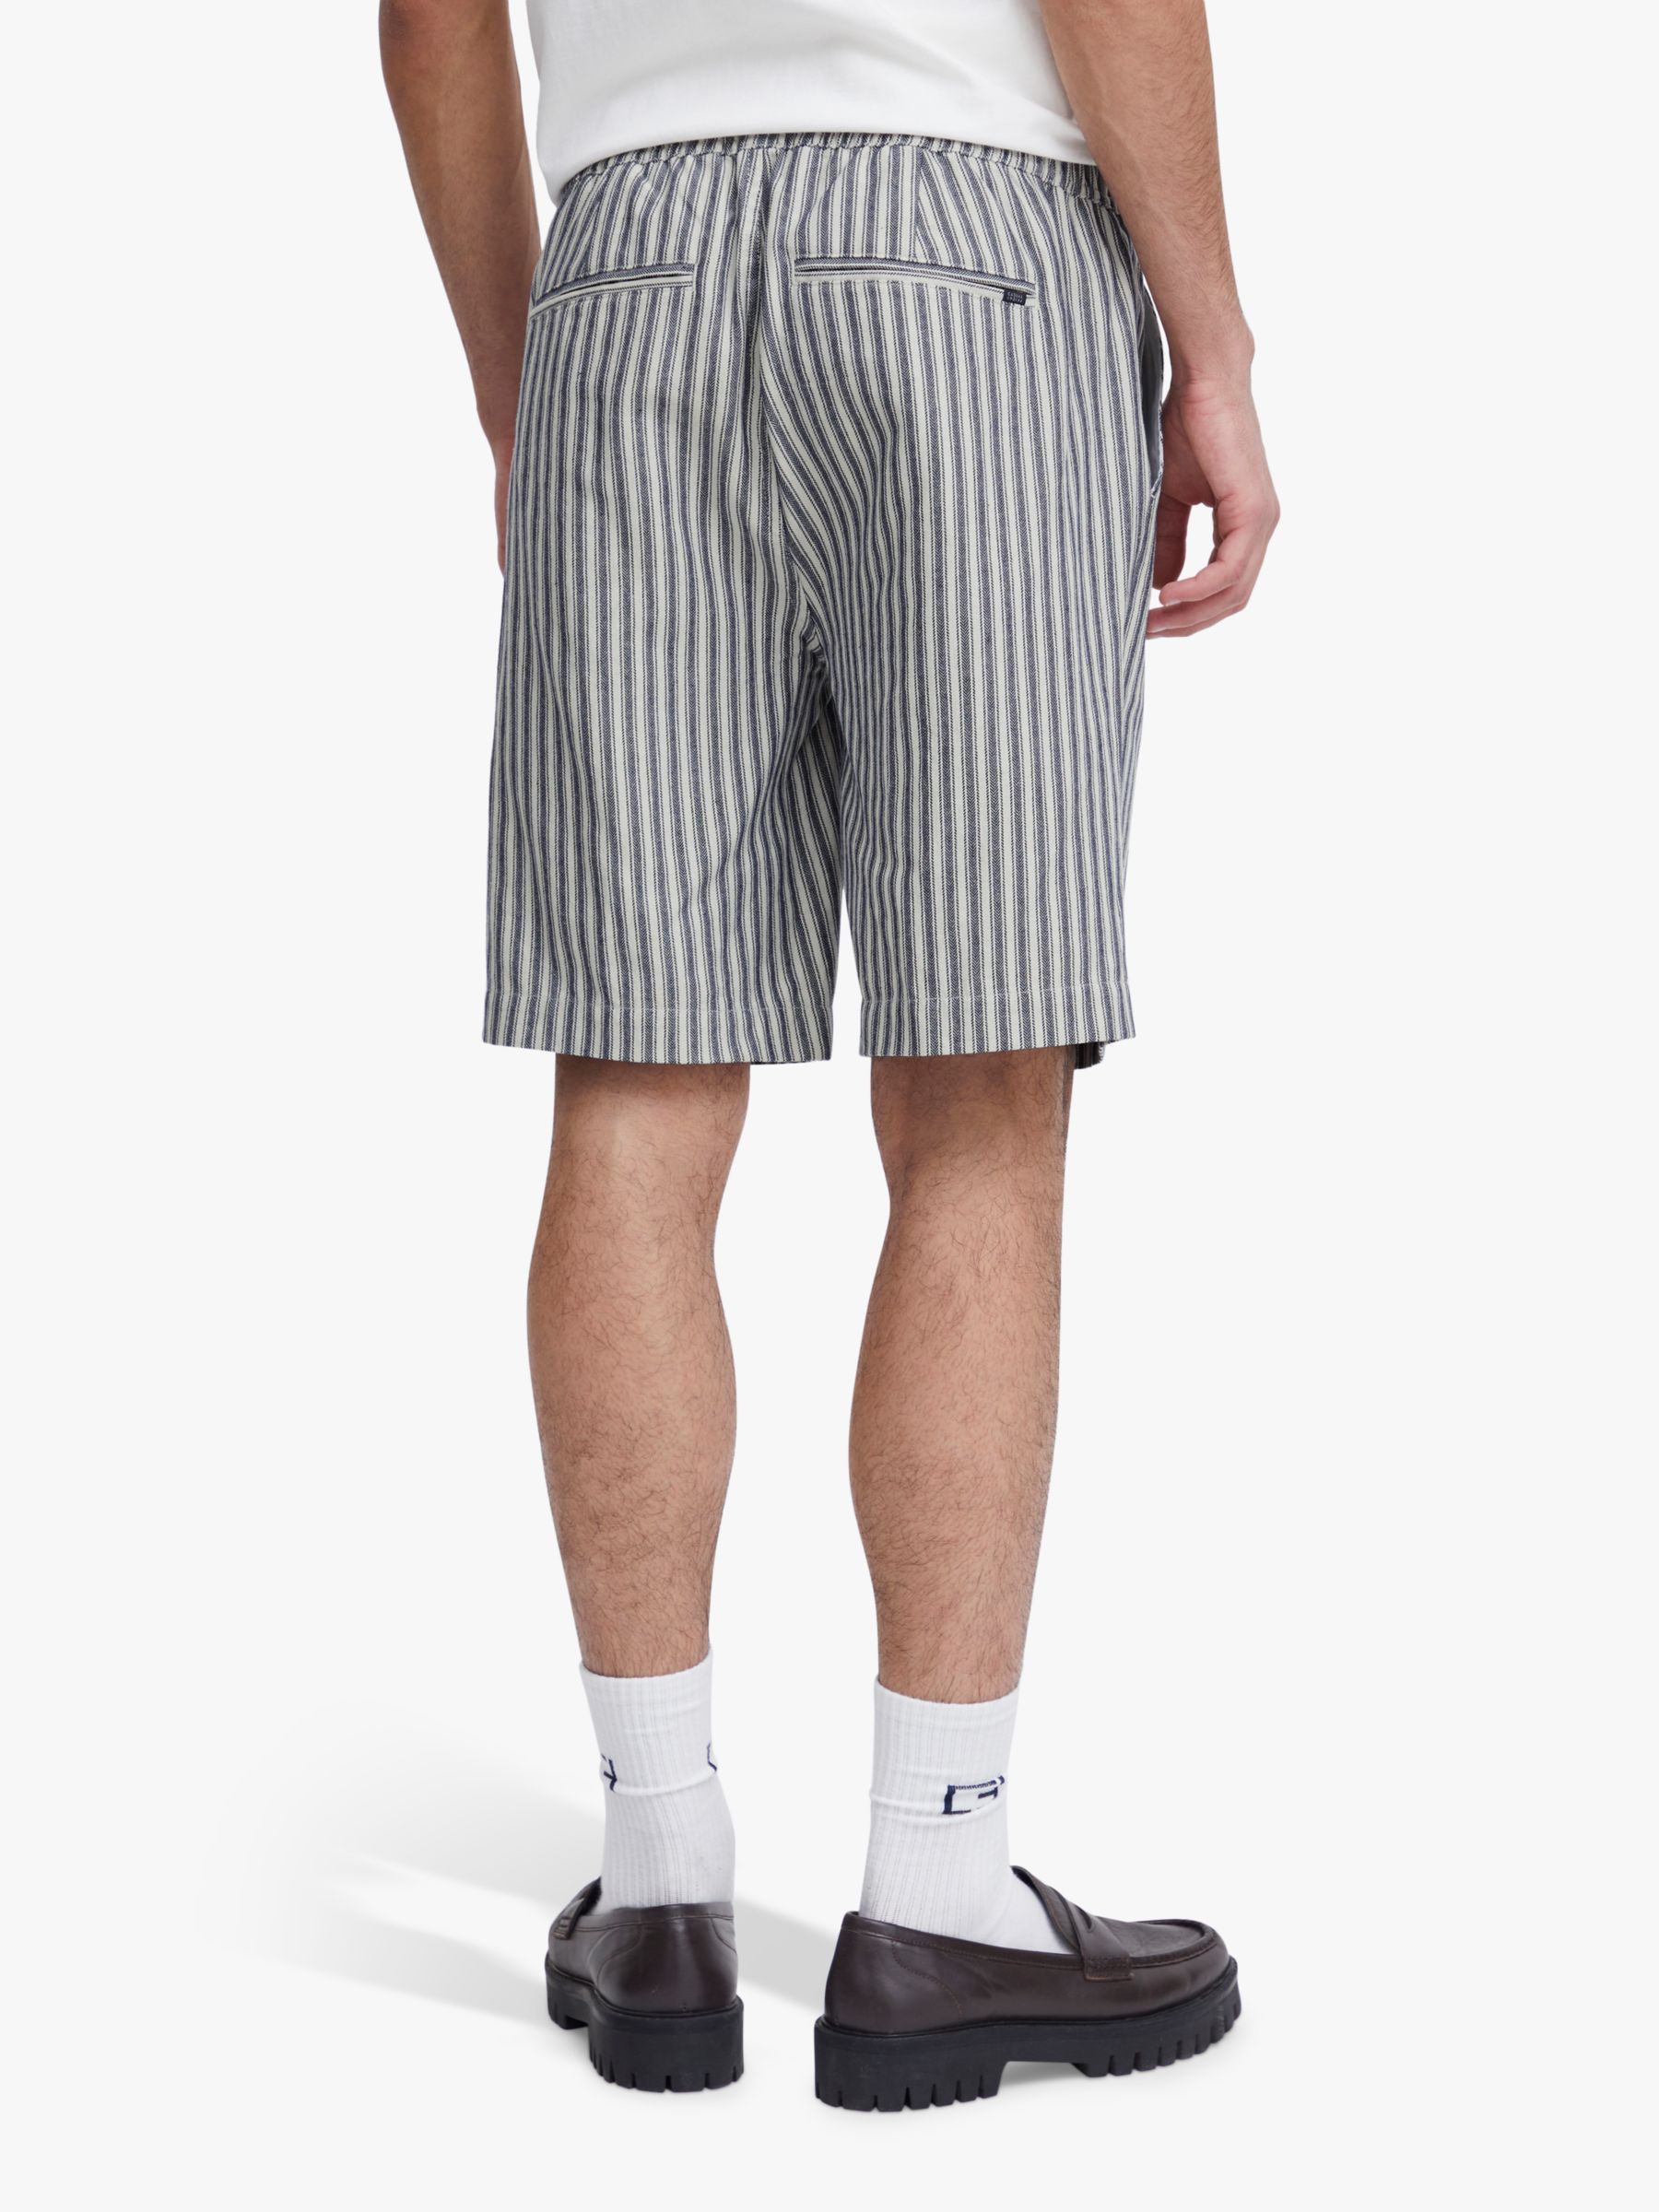 Buy Casual Friday Phelix Linen Mix Striped Shorts, Navy/White Online at johnlewis.com